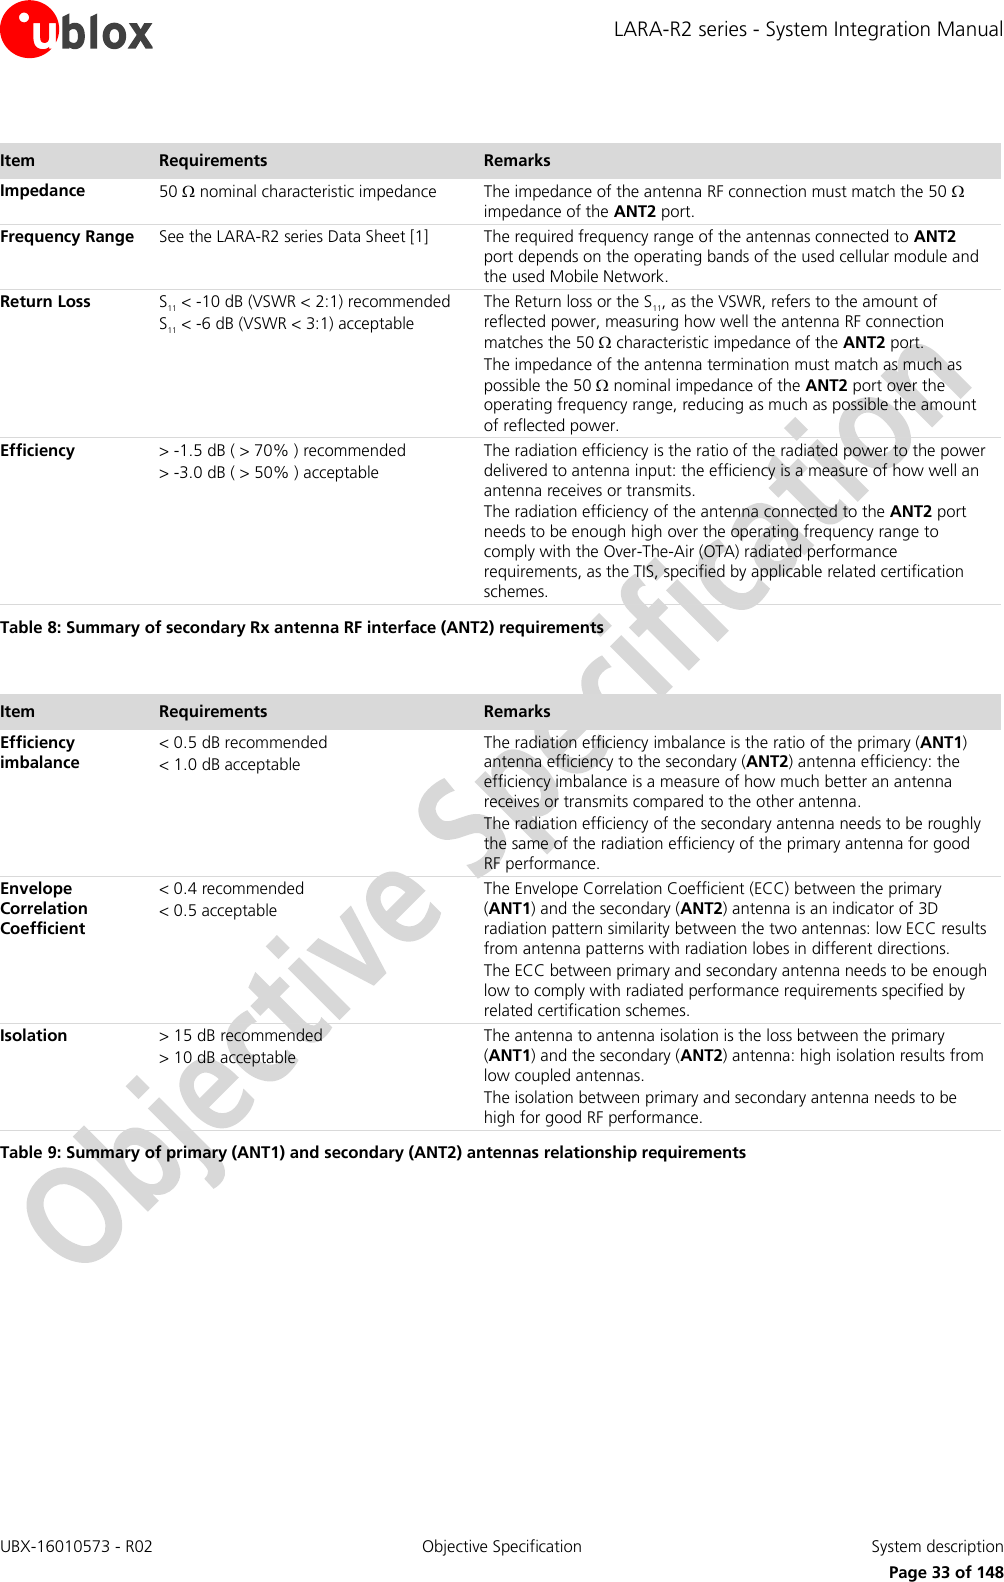 LARA-R2 series - System Integration Manual UBX-16010573 - R02  Objective Specification  System description     Page 33 of 148  Item Requirements Remarks Impedance  50  nominal characteristic impedance The impedance of the antenna RF connection must match the 50  impedance of the ANT2 port. Frequency Range  See the LARA-R2 series Data Sheet [1]  The required frequency range of the antennas connected to ANT2 port depends on the operating bands of the used cellular module and the used Mobile Network. Return Loss S11 &lt; -10 dB (VSWR &lt; 2:1) recommended S11 &lt; -6 dB (VSWR &lt; 3:1) acceptable The Return loss or the S11, as the VSWR, refers to the amount of reflected power, measuring how well the antenna RF connection matches the 50  characteristic impedance of the ANT2 port. The impedance of the antenna termination must match as much as possible the 50  nominal impedance of the ANT2 port over the operating frequency range, reducing as much as possible the amount of reflected power. Efficiency &gt; -1.5 dB ( &gt; 70% ) recommended &gt; -3.0 dB ( &gt; 50% ) acceptable The radiation efficiency is the ratio of the radiated power to the power delivered to antenna input: the efficiency is a measure of how well an antenna receives or transmits. The radiation efficiency of the antenna connected to the ANT2 port needs to be enough high over the operating frequency range to comply with the Over-The-Air (OTA) radiated performance requirements, as the TIS, specified by applicable related certification schemes. Table 8: Summary of secondary Rx antenna RF interface (ANT2) requirements  Item Requirements Remarks Efficiency imbalance  &lt; 0.5 dB recommended &lt; 1.0 dB acceptable The radiation efficiency imbalance is the ratio of the primary (ANT1) antenna efficiency to the secondary (ANT2) antenna efficiency: the efficiency imbalance is a measure of how much better an antenna receives or transmits compared to the other antenna. The radiation efficiency of the secondary antenna needs to be roughly the same of the radiation efficiency of the primary antenna for good RF performance. Envelope Correlation Coefficient  &lt; 0.4 recommended &lt; 0.5 acceptable The Envelope Correlation Coefficient (ECC) between the primary (ANT1) and the secondary (ANT2) antenna is an indicator of 3D radiation pattern similarity between the two antennas: low ECC results from antenna patterns with radiation lobes in different directions. The ECC between primary and secondary antenna needs to be enough low to comply with radiated performance requirements specified by related certification schemes. Isolation  &gt; 15 dB recommended &gt; 10 dB acceptable The antenna to antenna isolation is the loss between the primary (ANT1) and the secondary (ANT2) antenna: high isolation results from low coupled antennas. The isolation between primary and secondary antenna needs to be high for good RF performance. Table 9: Summary of primary (ANT1) and secondary (ANT2) antennas relationship requirements  